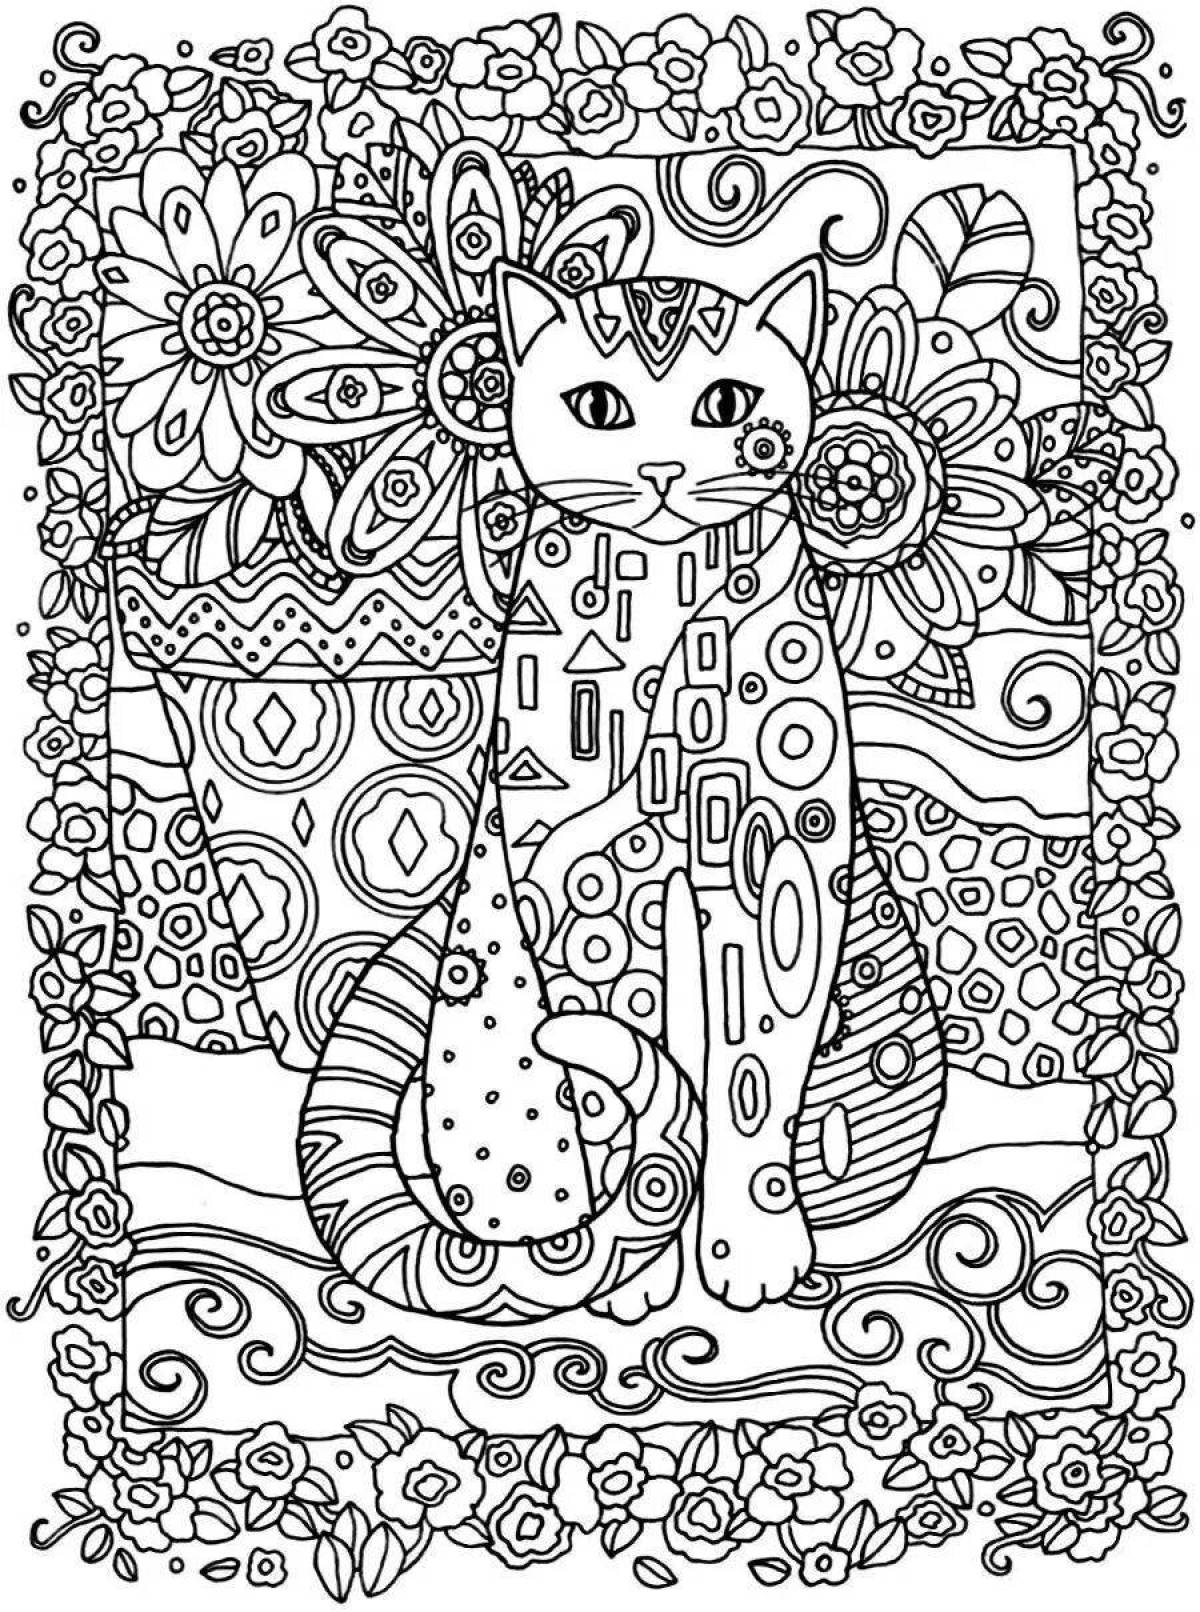 Coloring page playful patterned cat